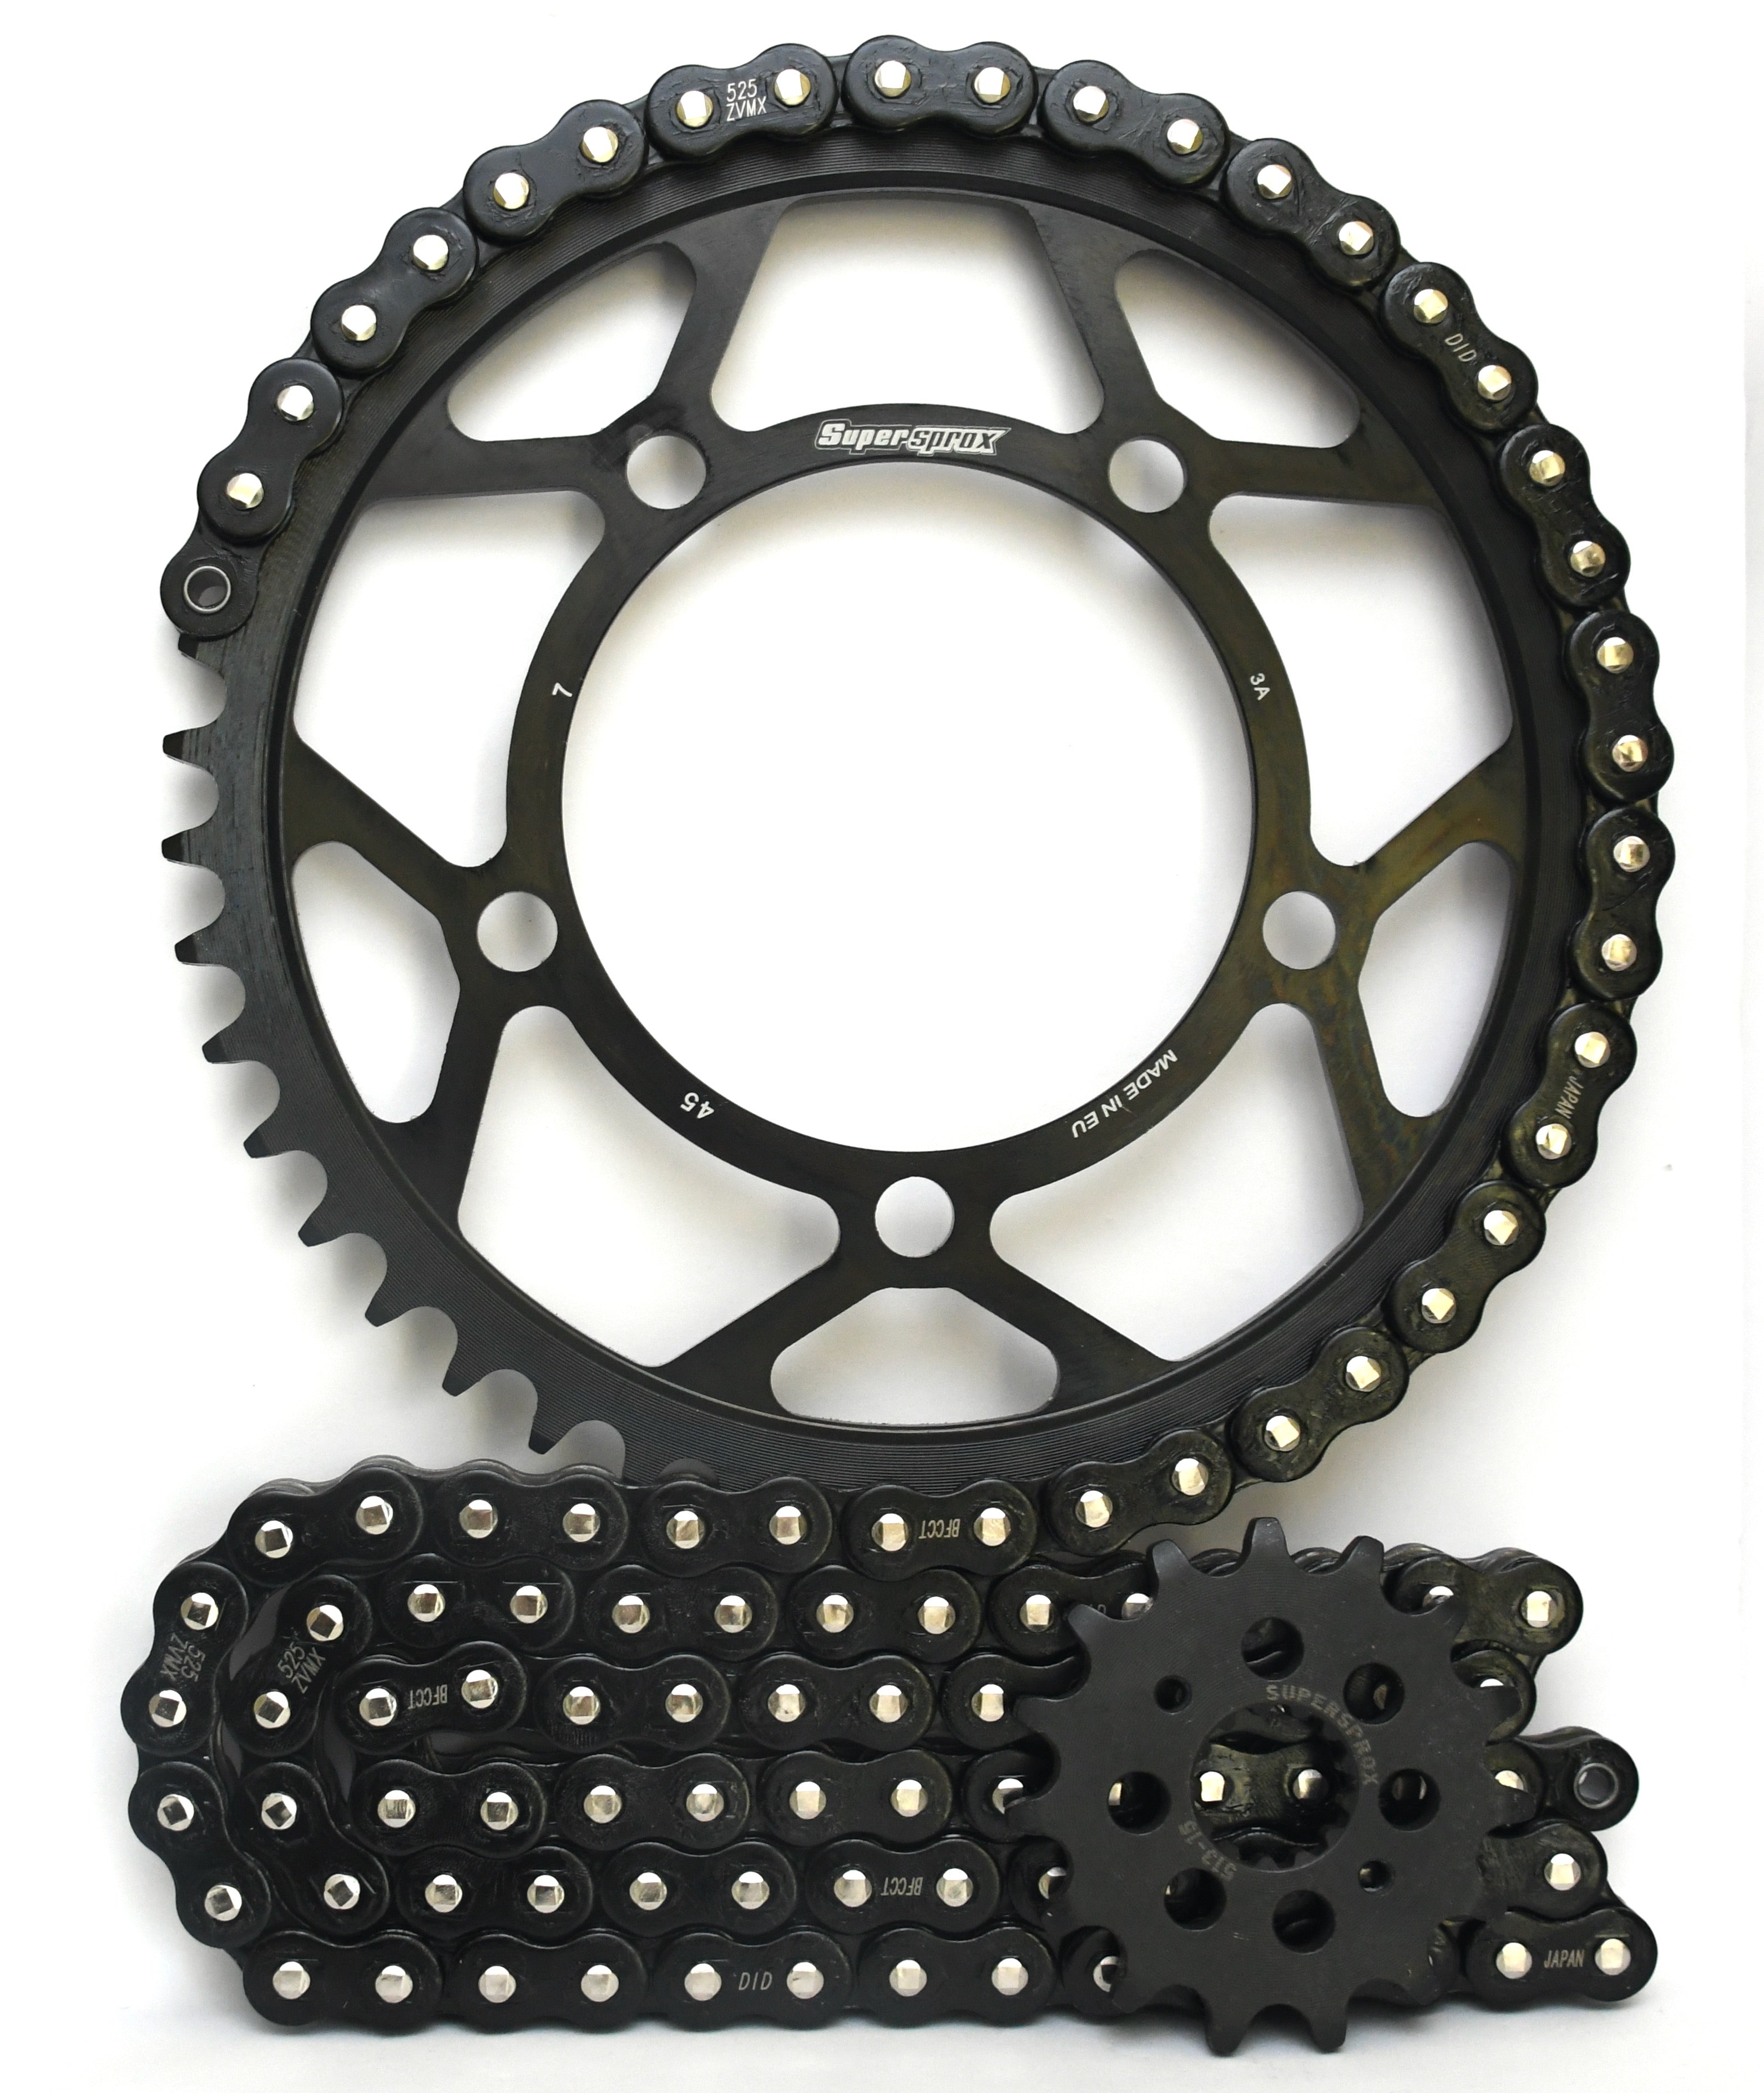 Supersprox Chain and Steel Sprocket Kit - BMW S1000XR 2015-2019 - Standard Gearing